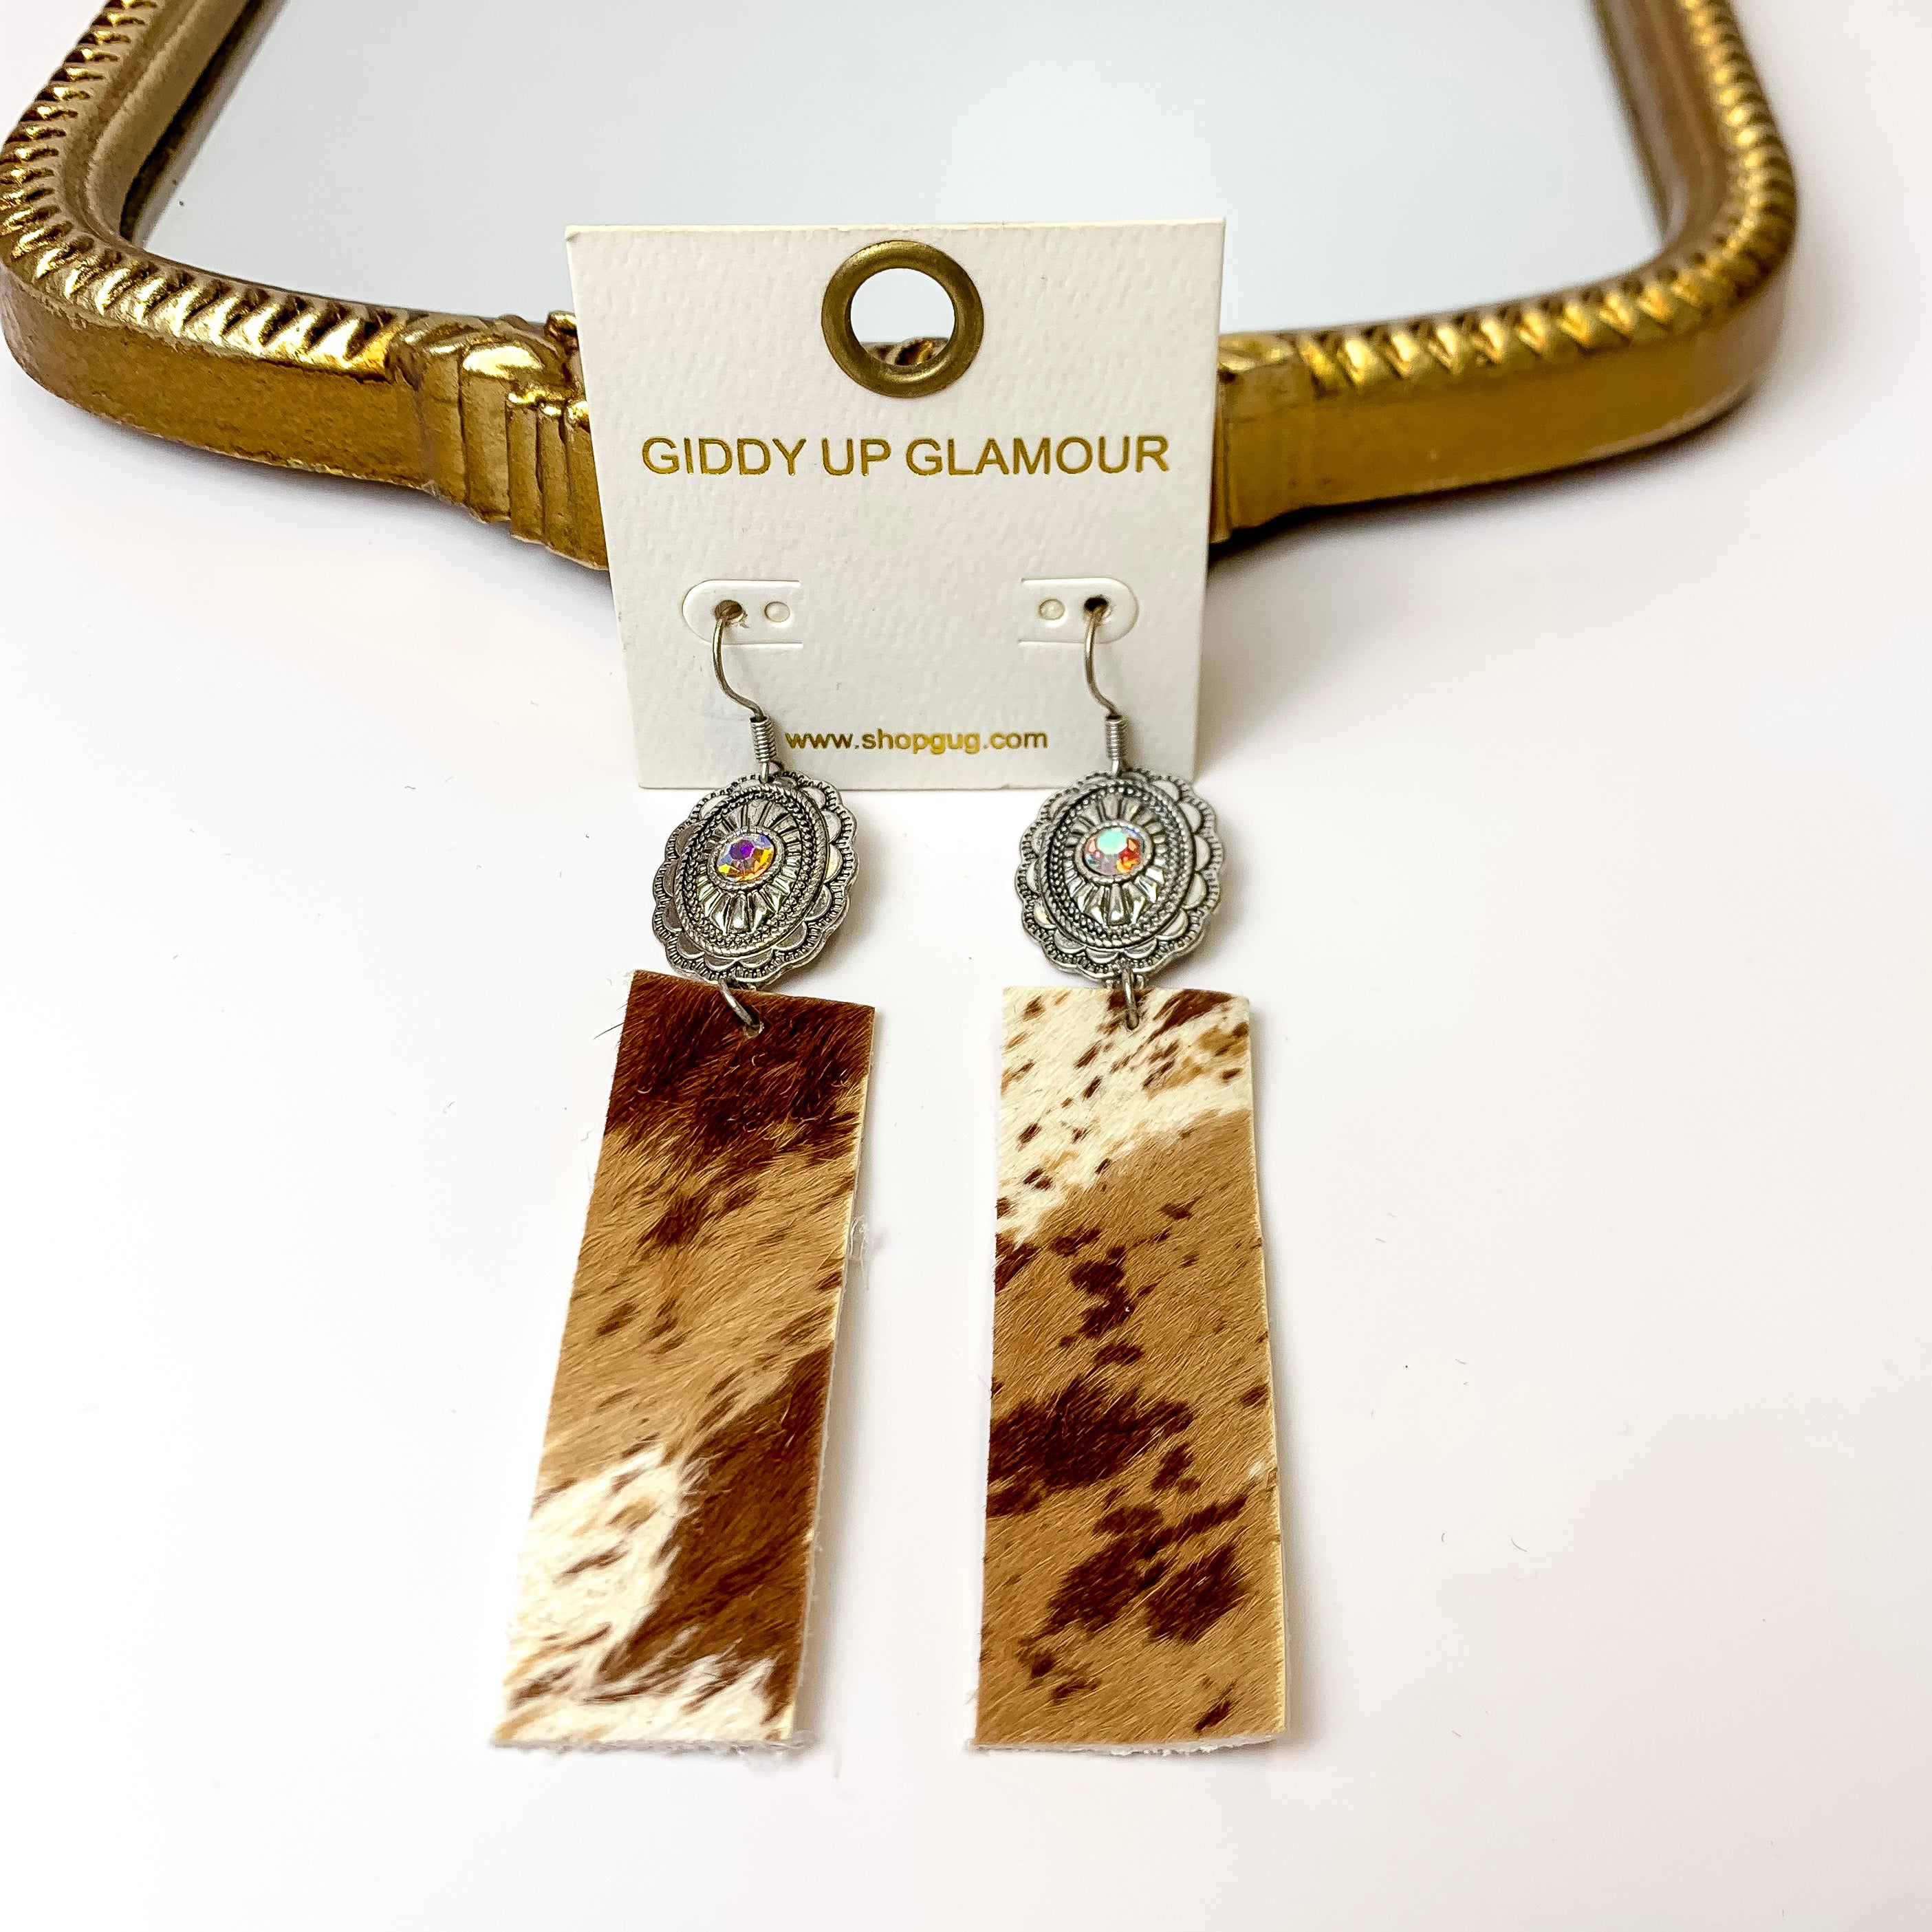 Silver Concho Earrings with Faux Cow Hide in Brown/White - Giddy Up Glamour Boutique